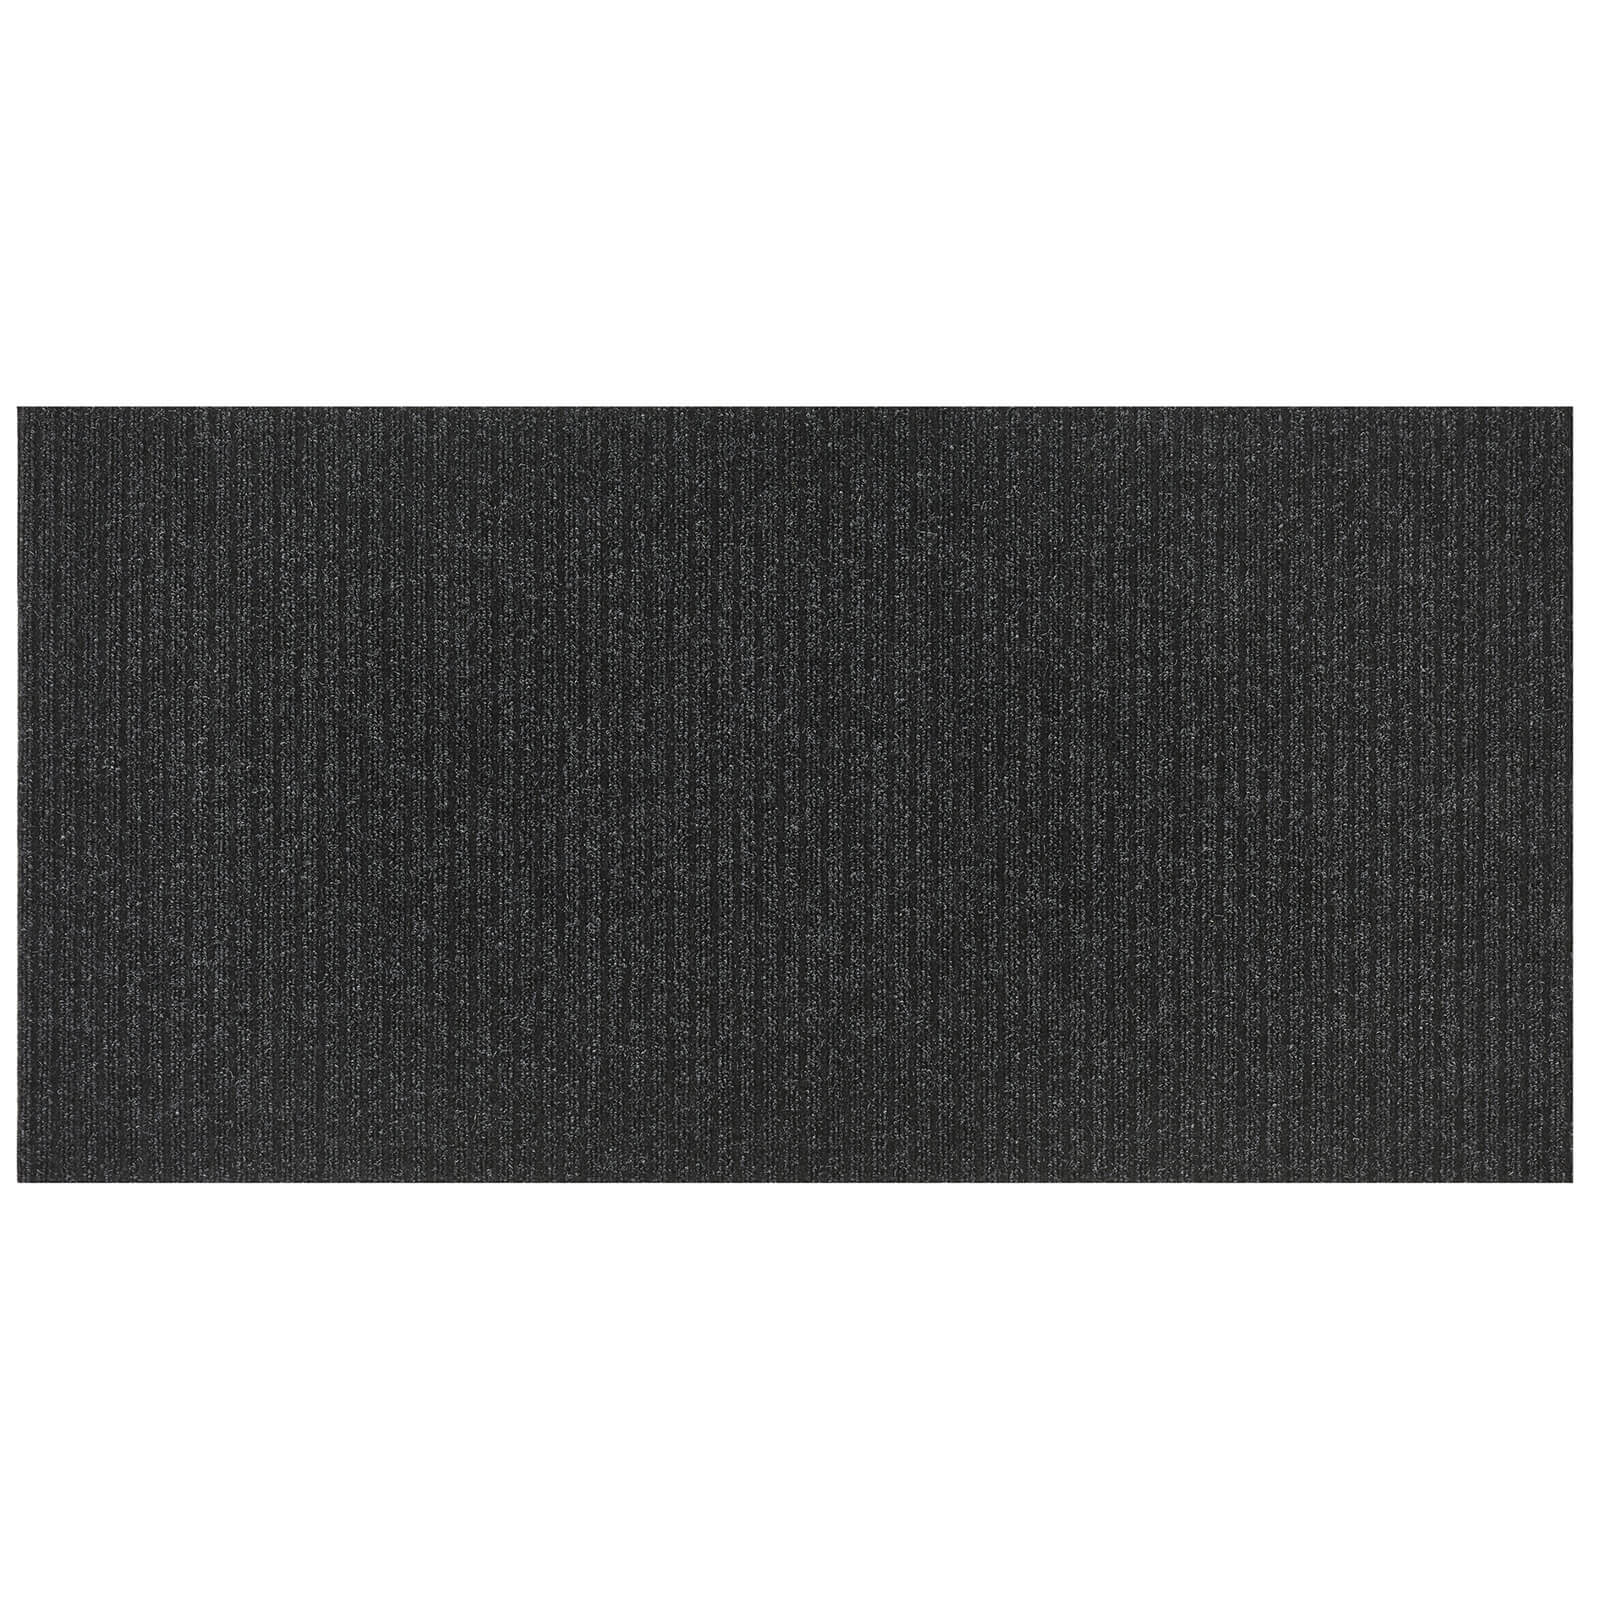 Photo of Synthetic Ribbed Coir Matting - Black